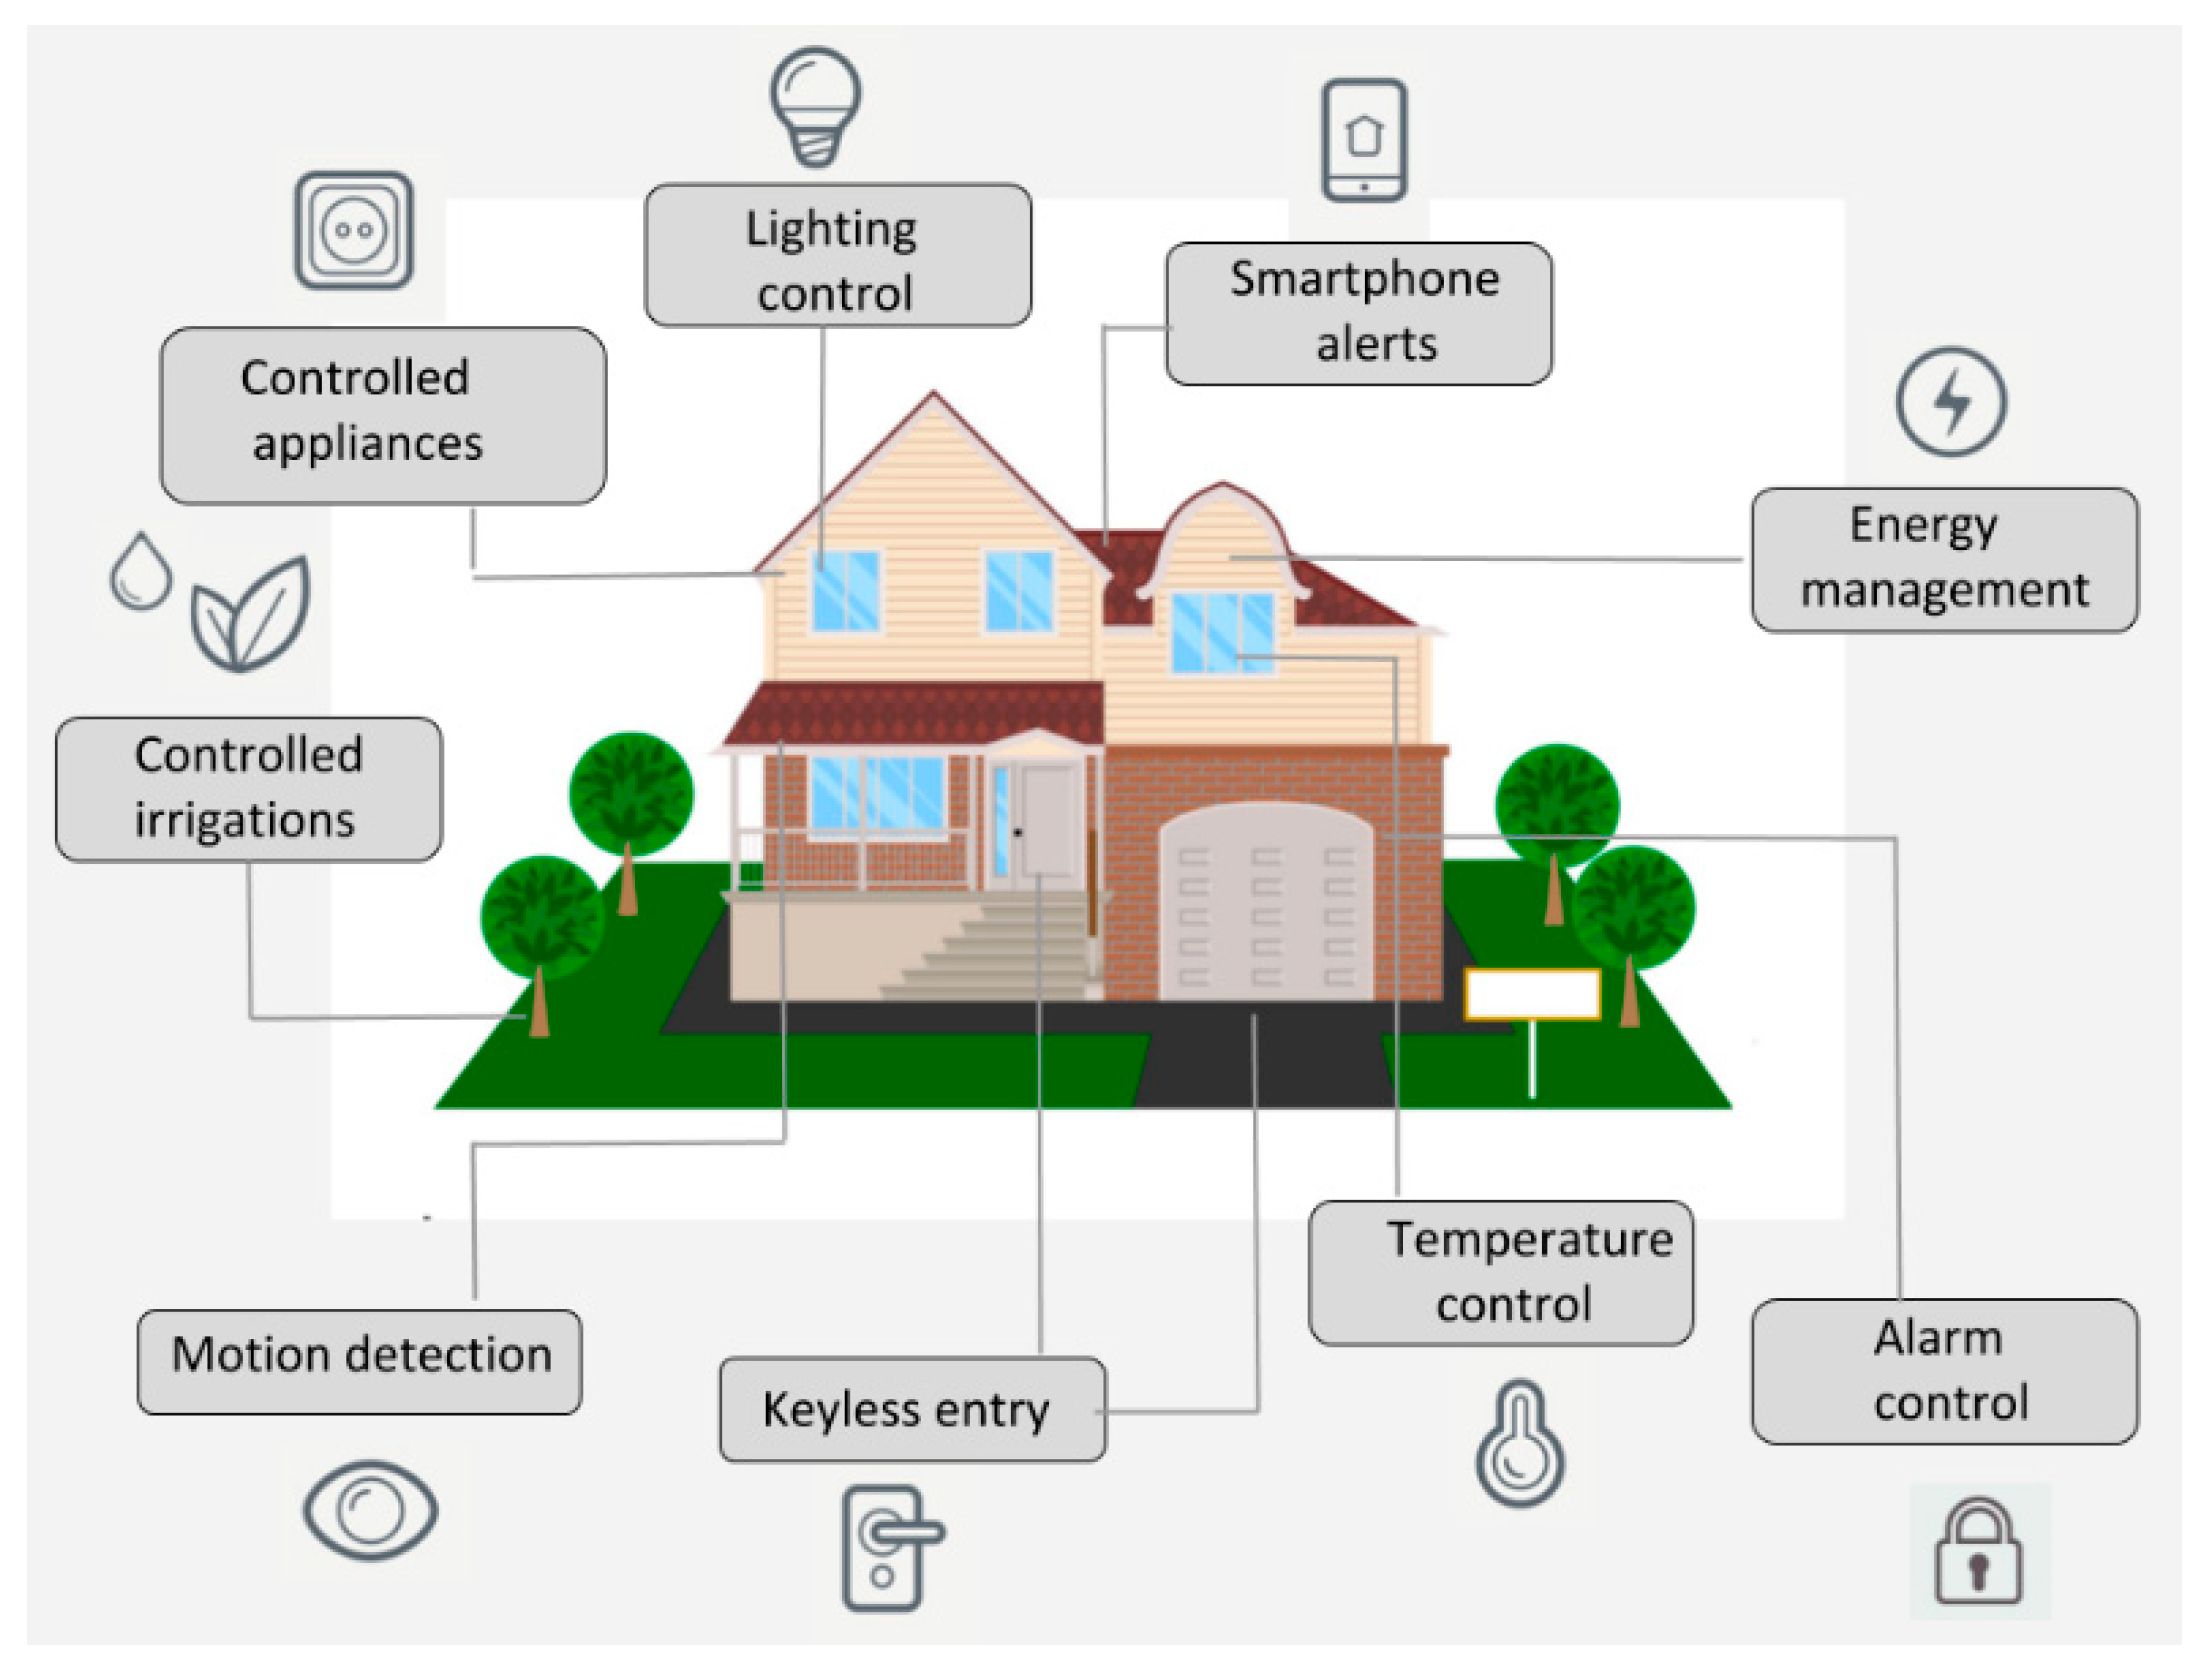 what-functionality-does-an-internet-of-things-iot-home-appliance-provide-to-a-homeowner